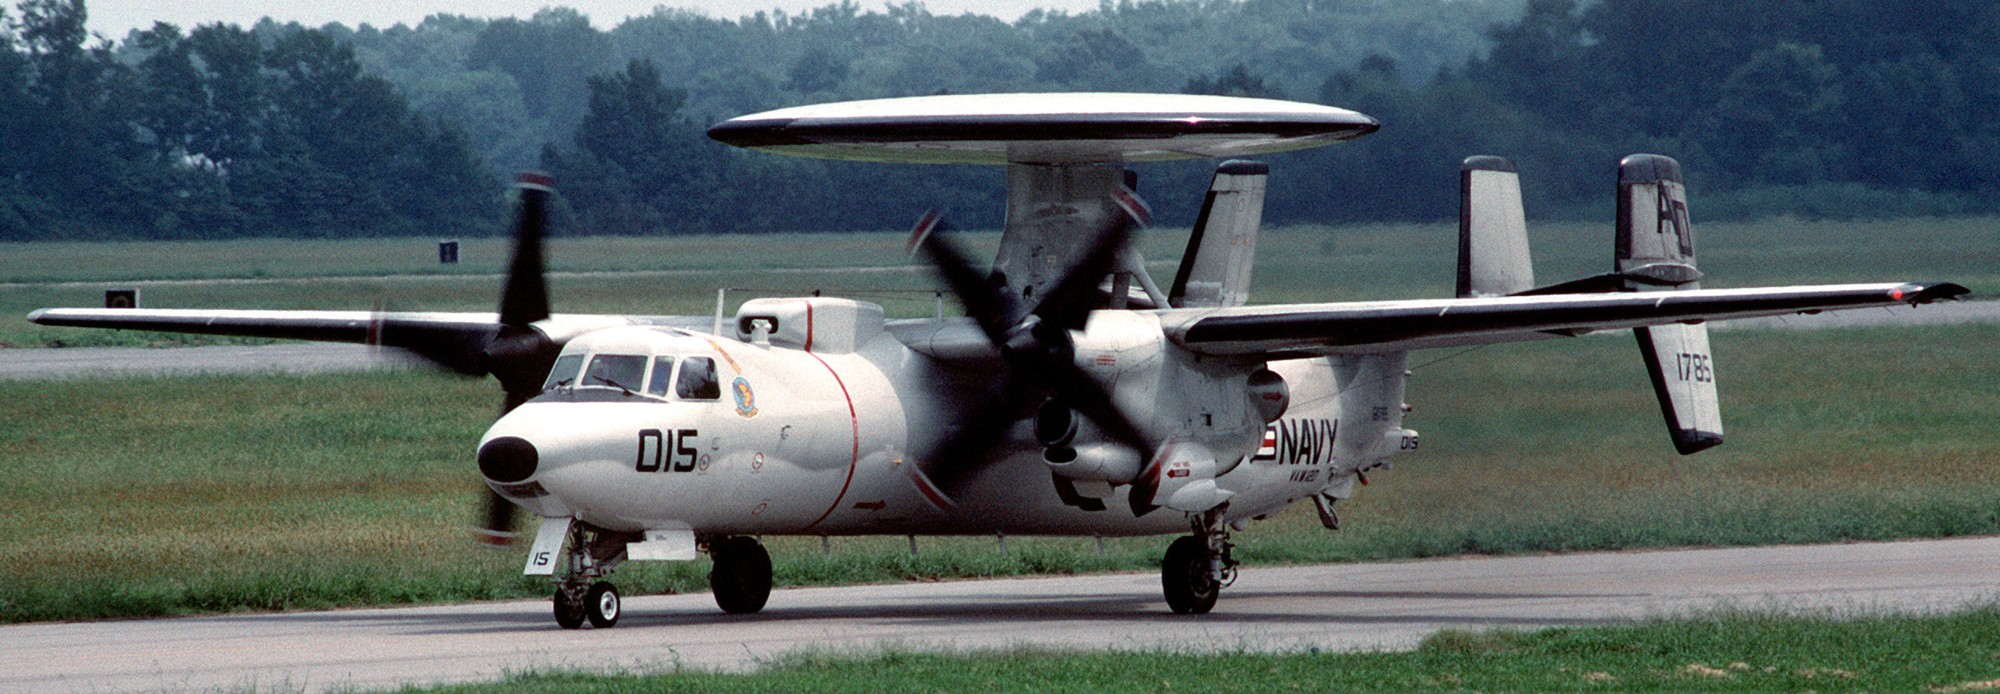 vaw-120 greyhawks carrier airborne early warning squadron e-2c hawkeye replacement nas oceana virginia 120